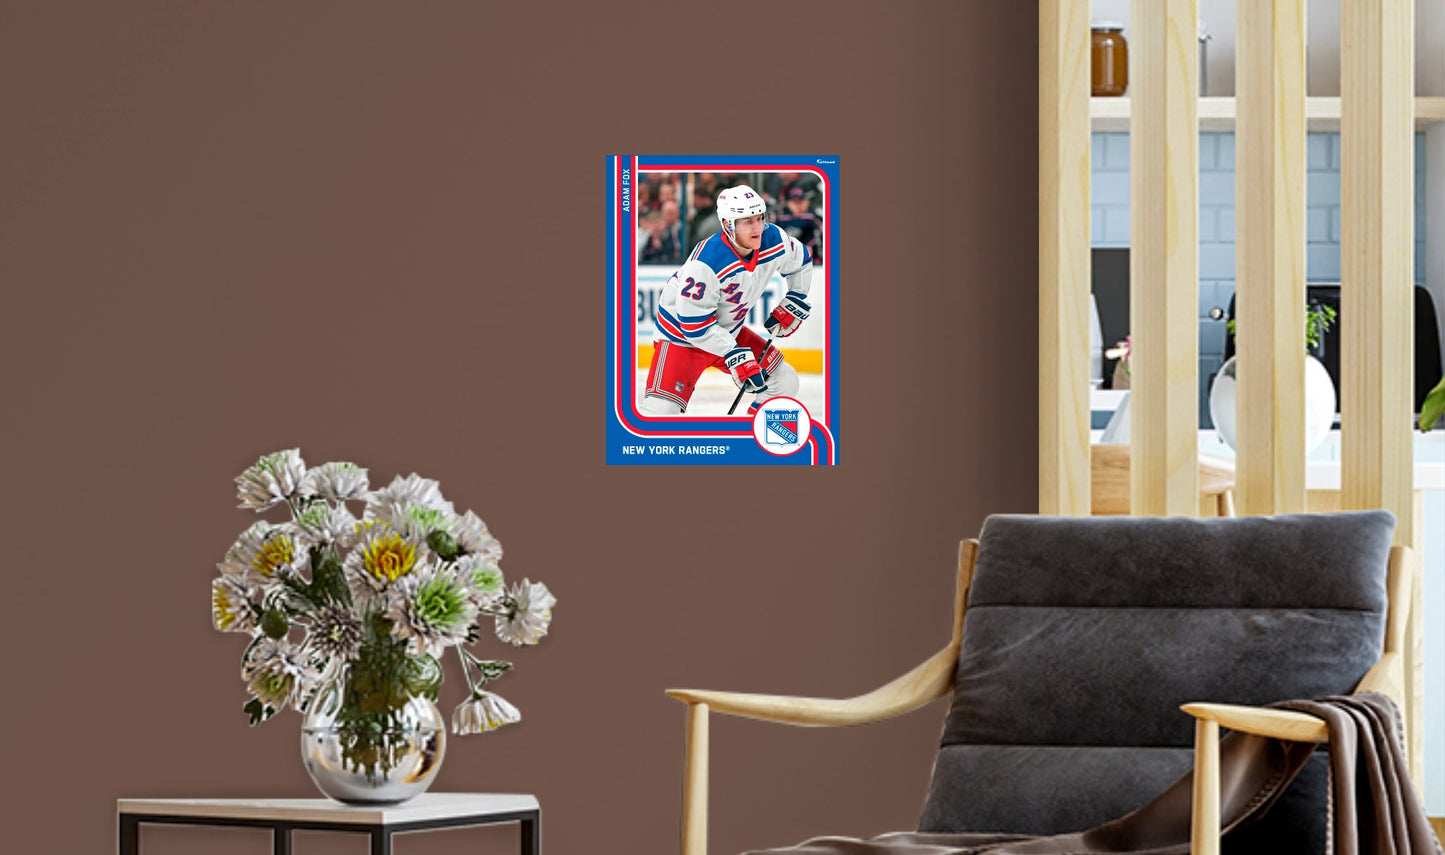 New York Rangers: Adam Fox Poster - Officially Licensed NHL Removable Adhesive Decal